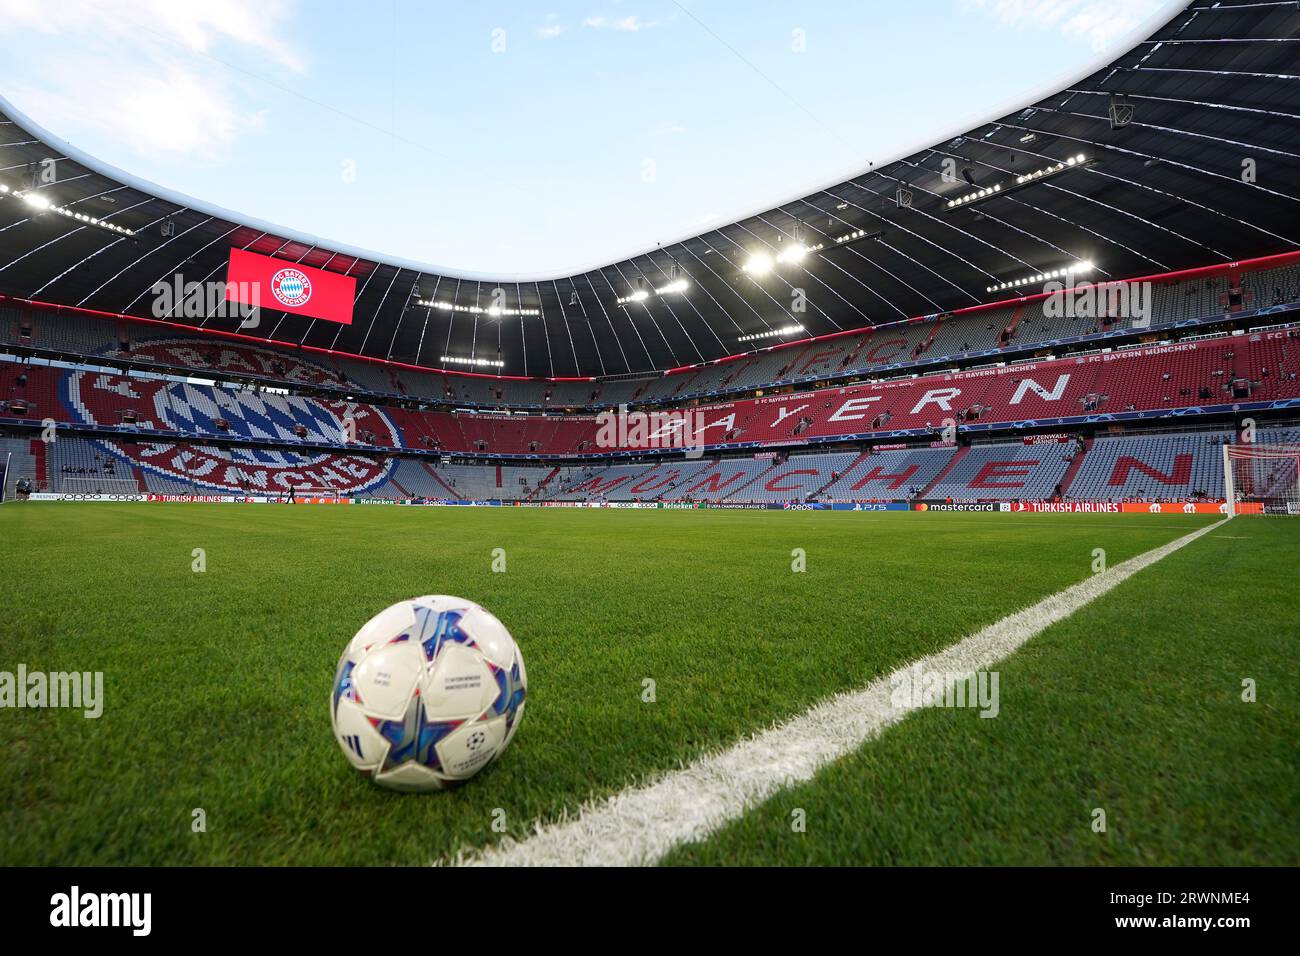 A general view of the Allianz Arena and UEFA Champions League branding  pitch side before the match Stock Photo - Alamy